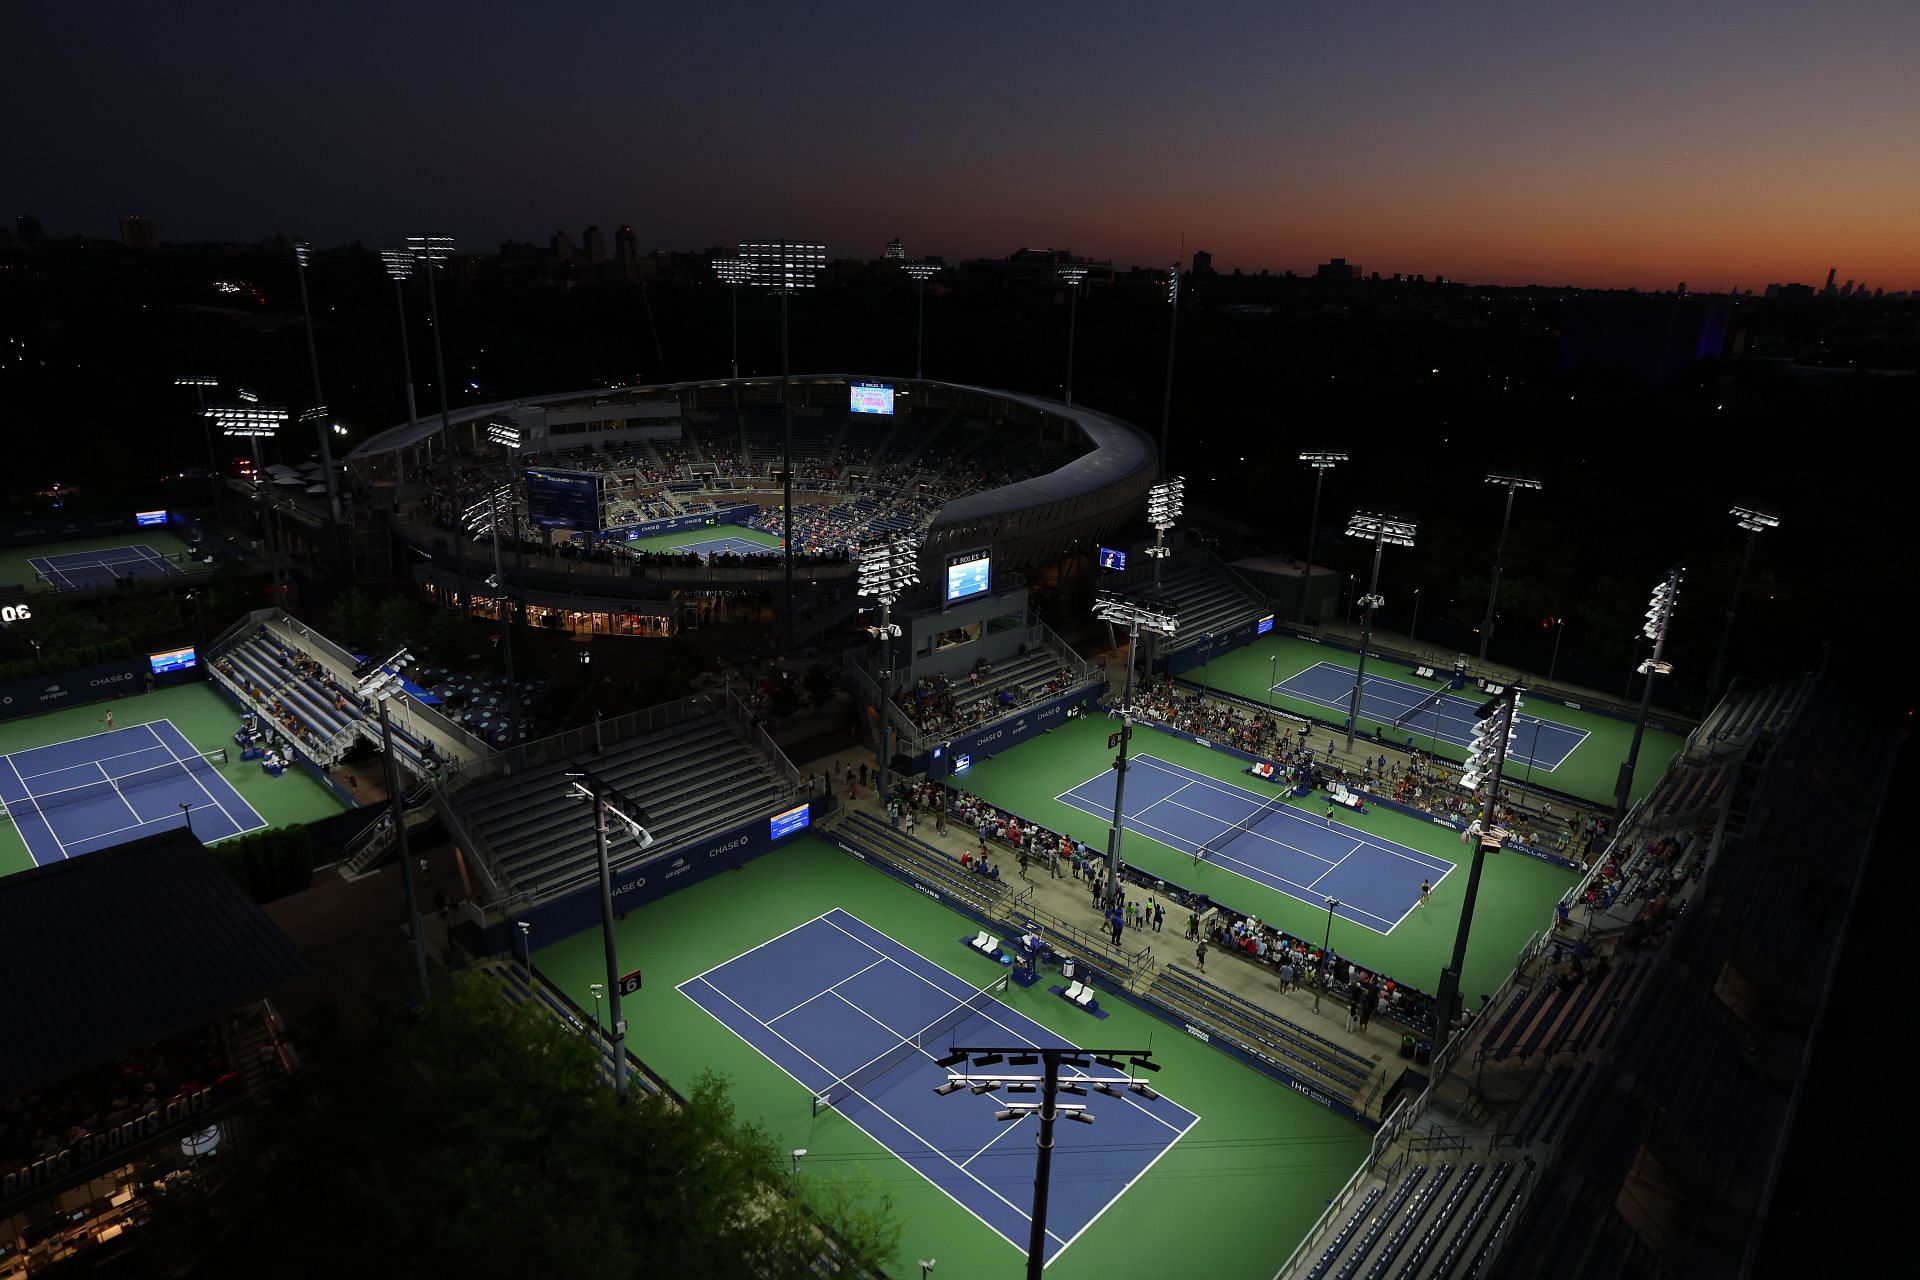 The 2022 US Open will see a first-time Grand Slam champion crowned.